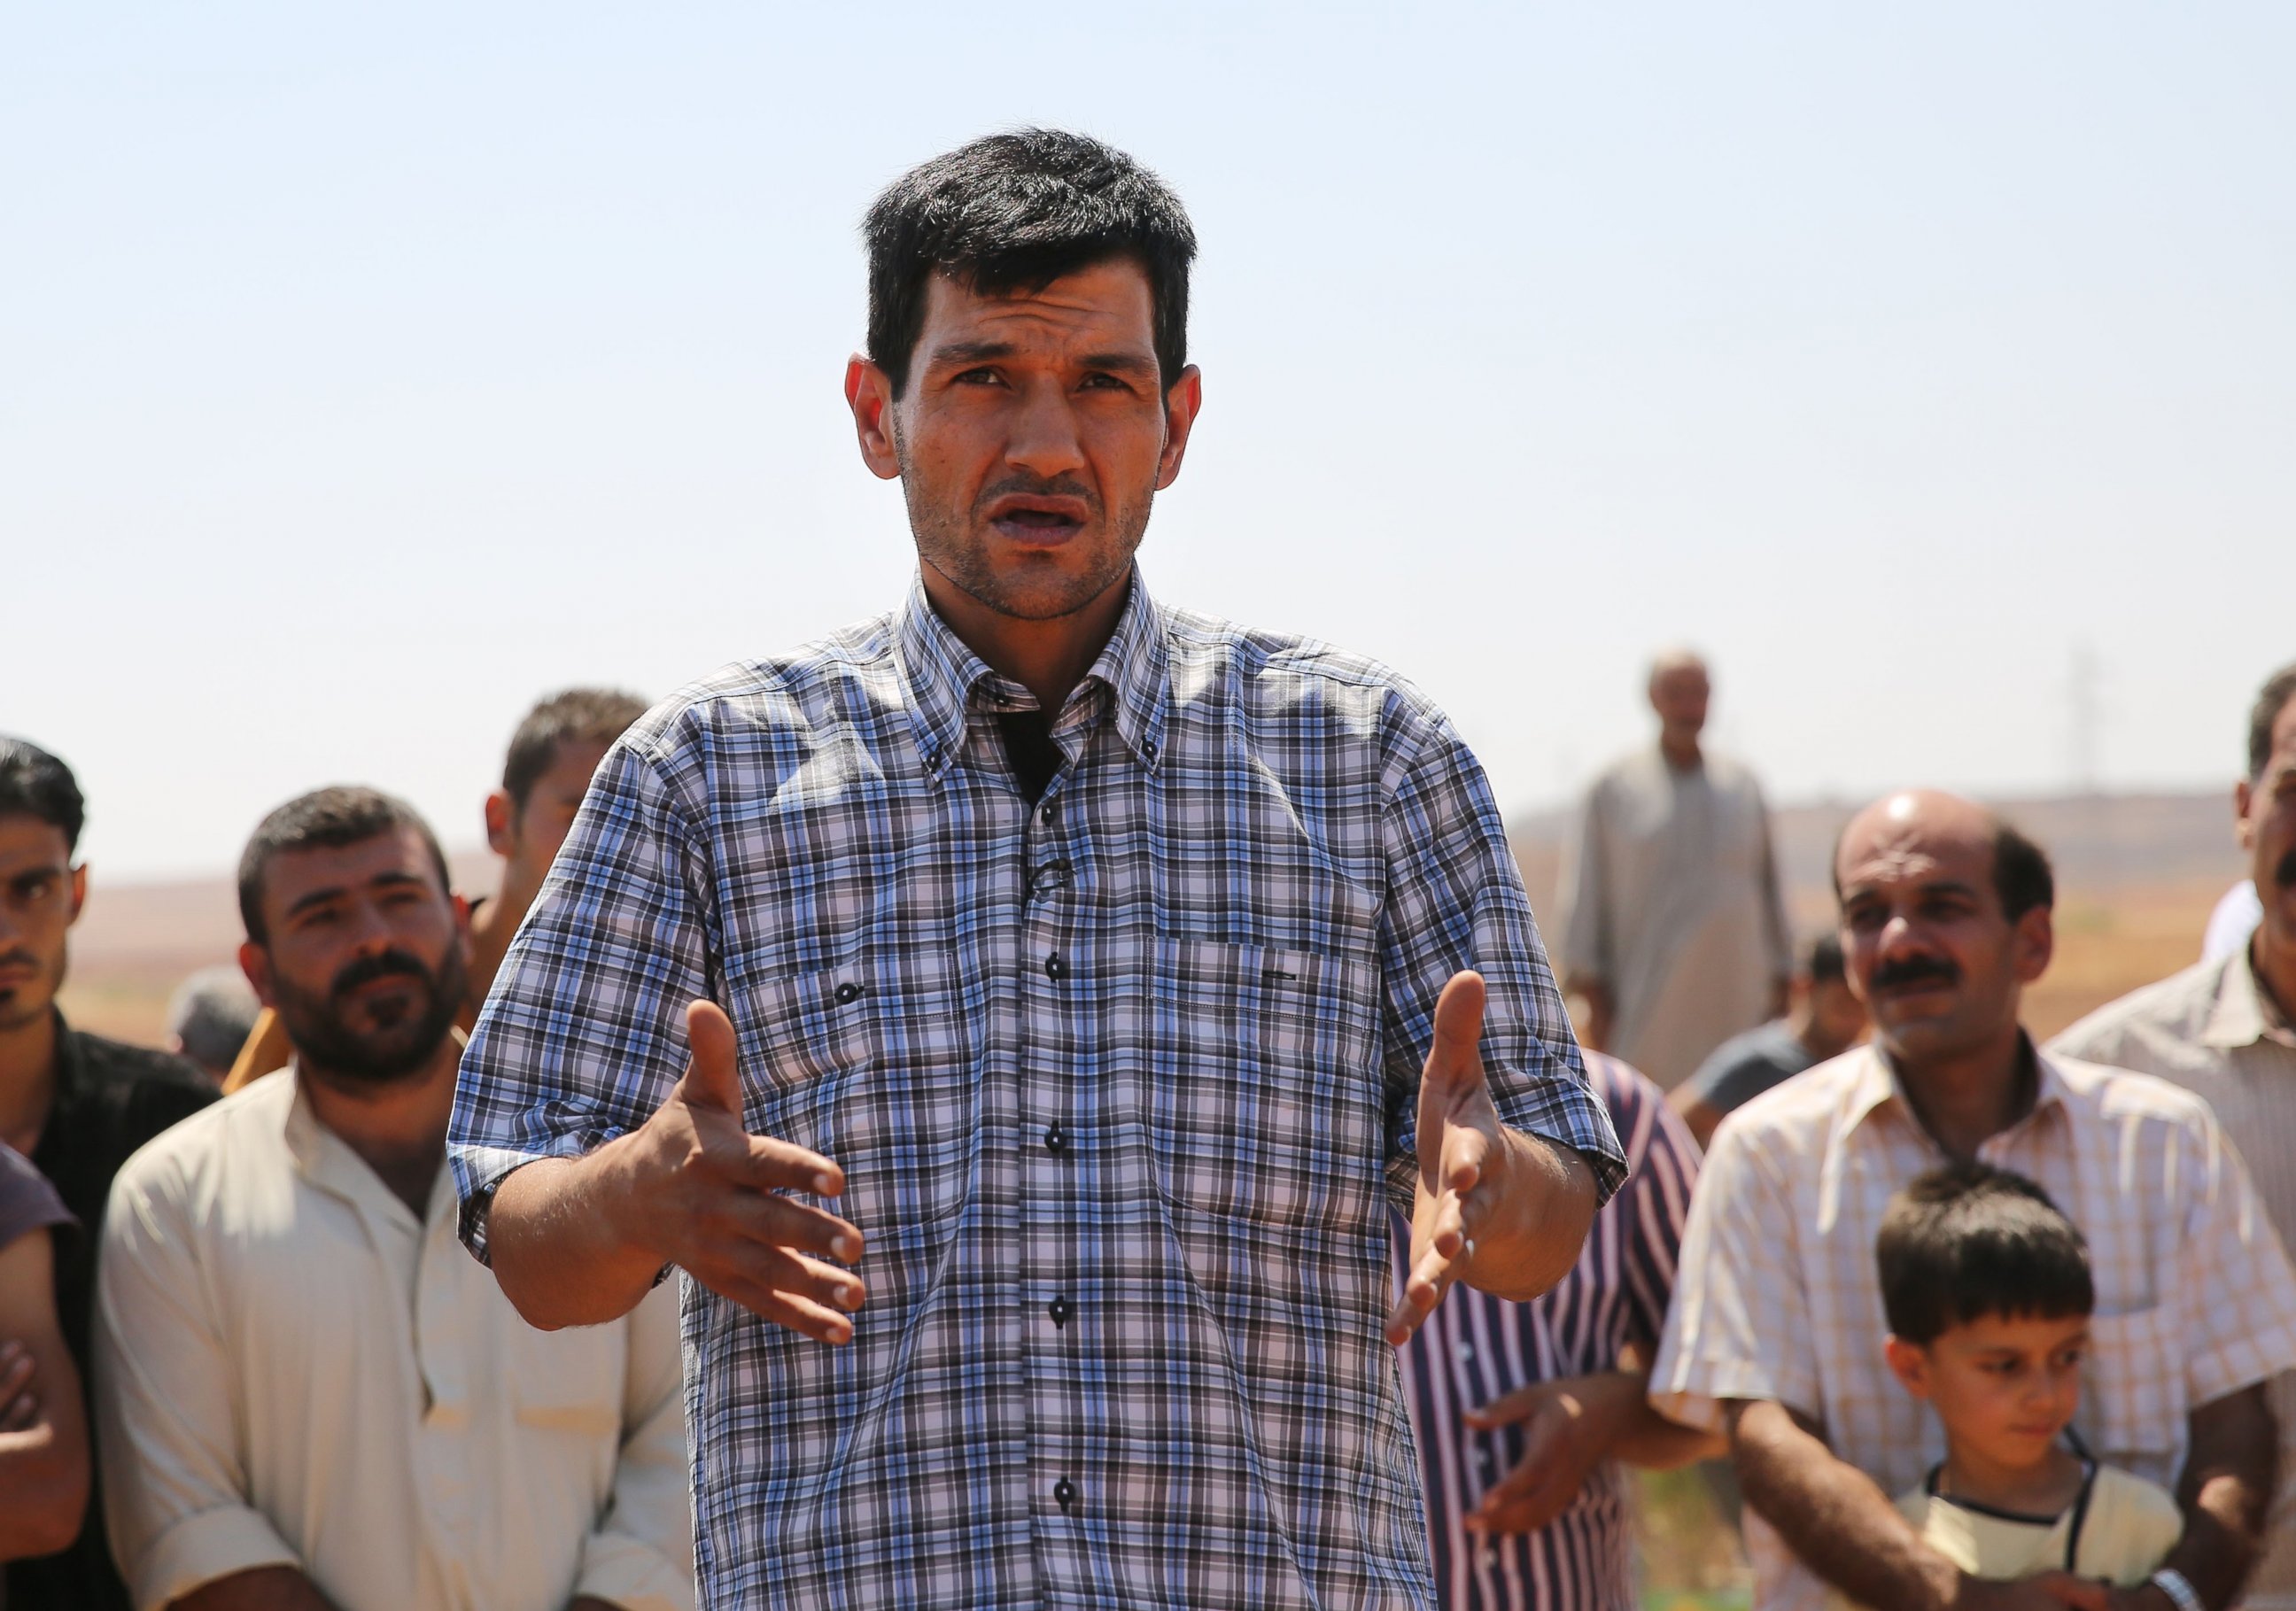 PHOTO: Abdullah Kurdi, father of Syrian children Aylan, Galip, and husband of Rehan, speaks during the funeral of his family in the Syrian border town of Kobani, Sept. 4, 2015. 